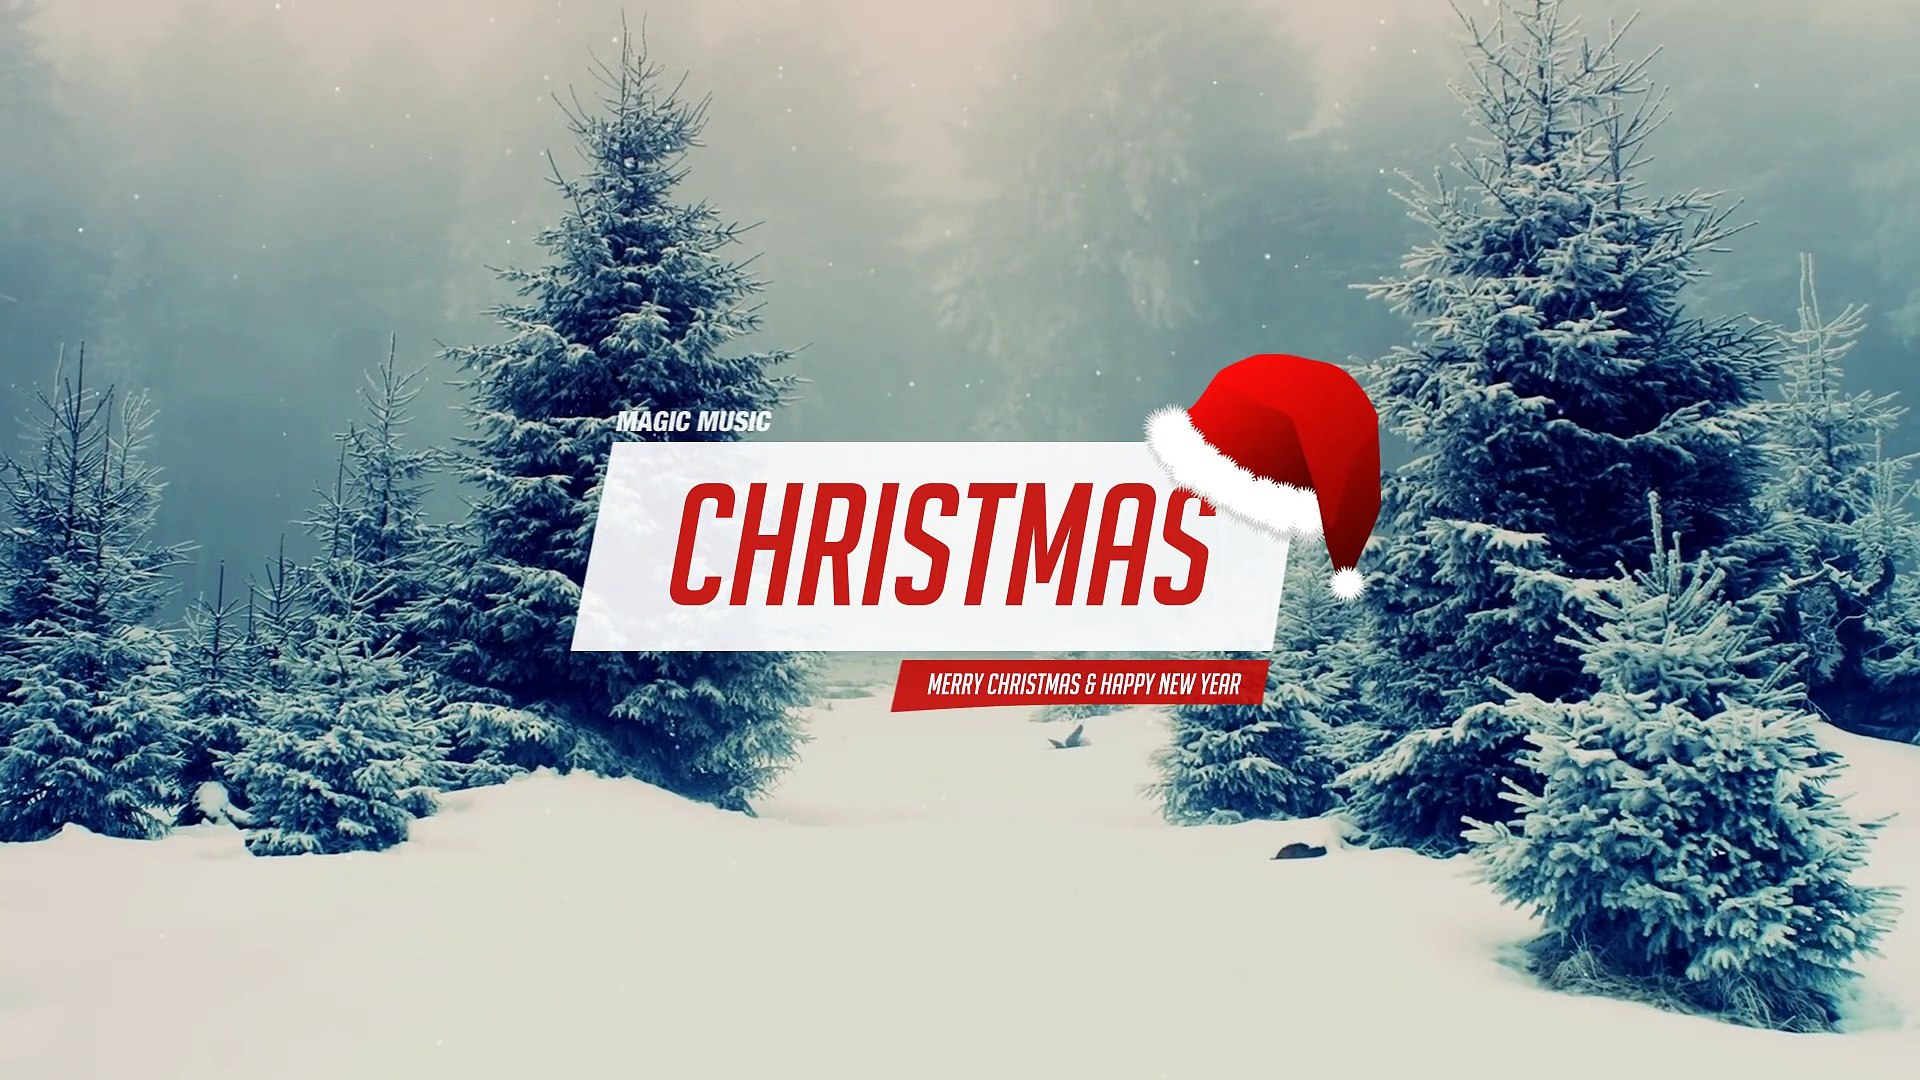 Christmas Music Mix Best Trap, Dubstep, EDM Merry Christmas Songs 2016 -  video Dailymotion